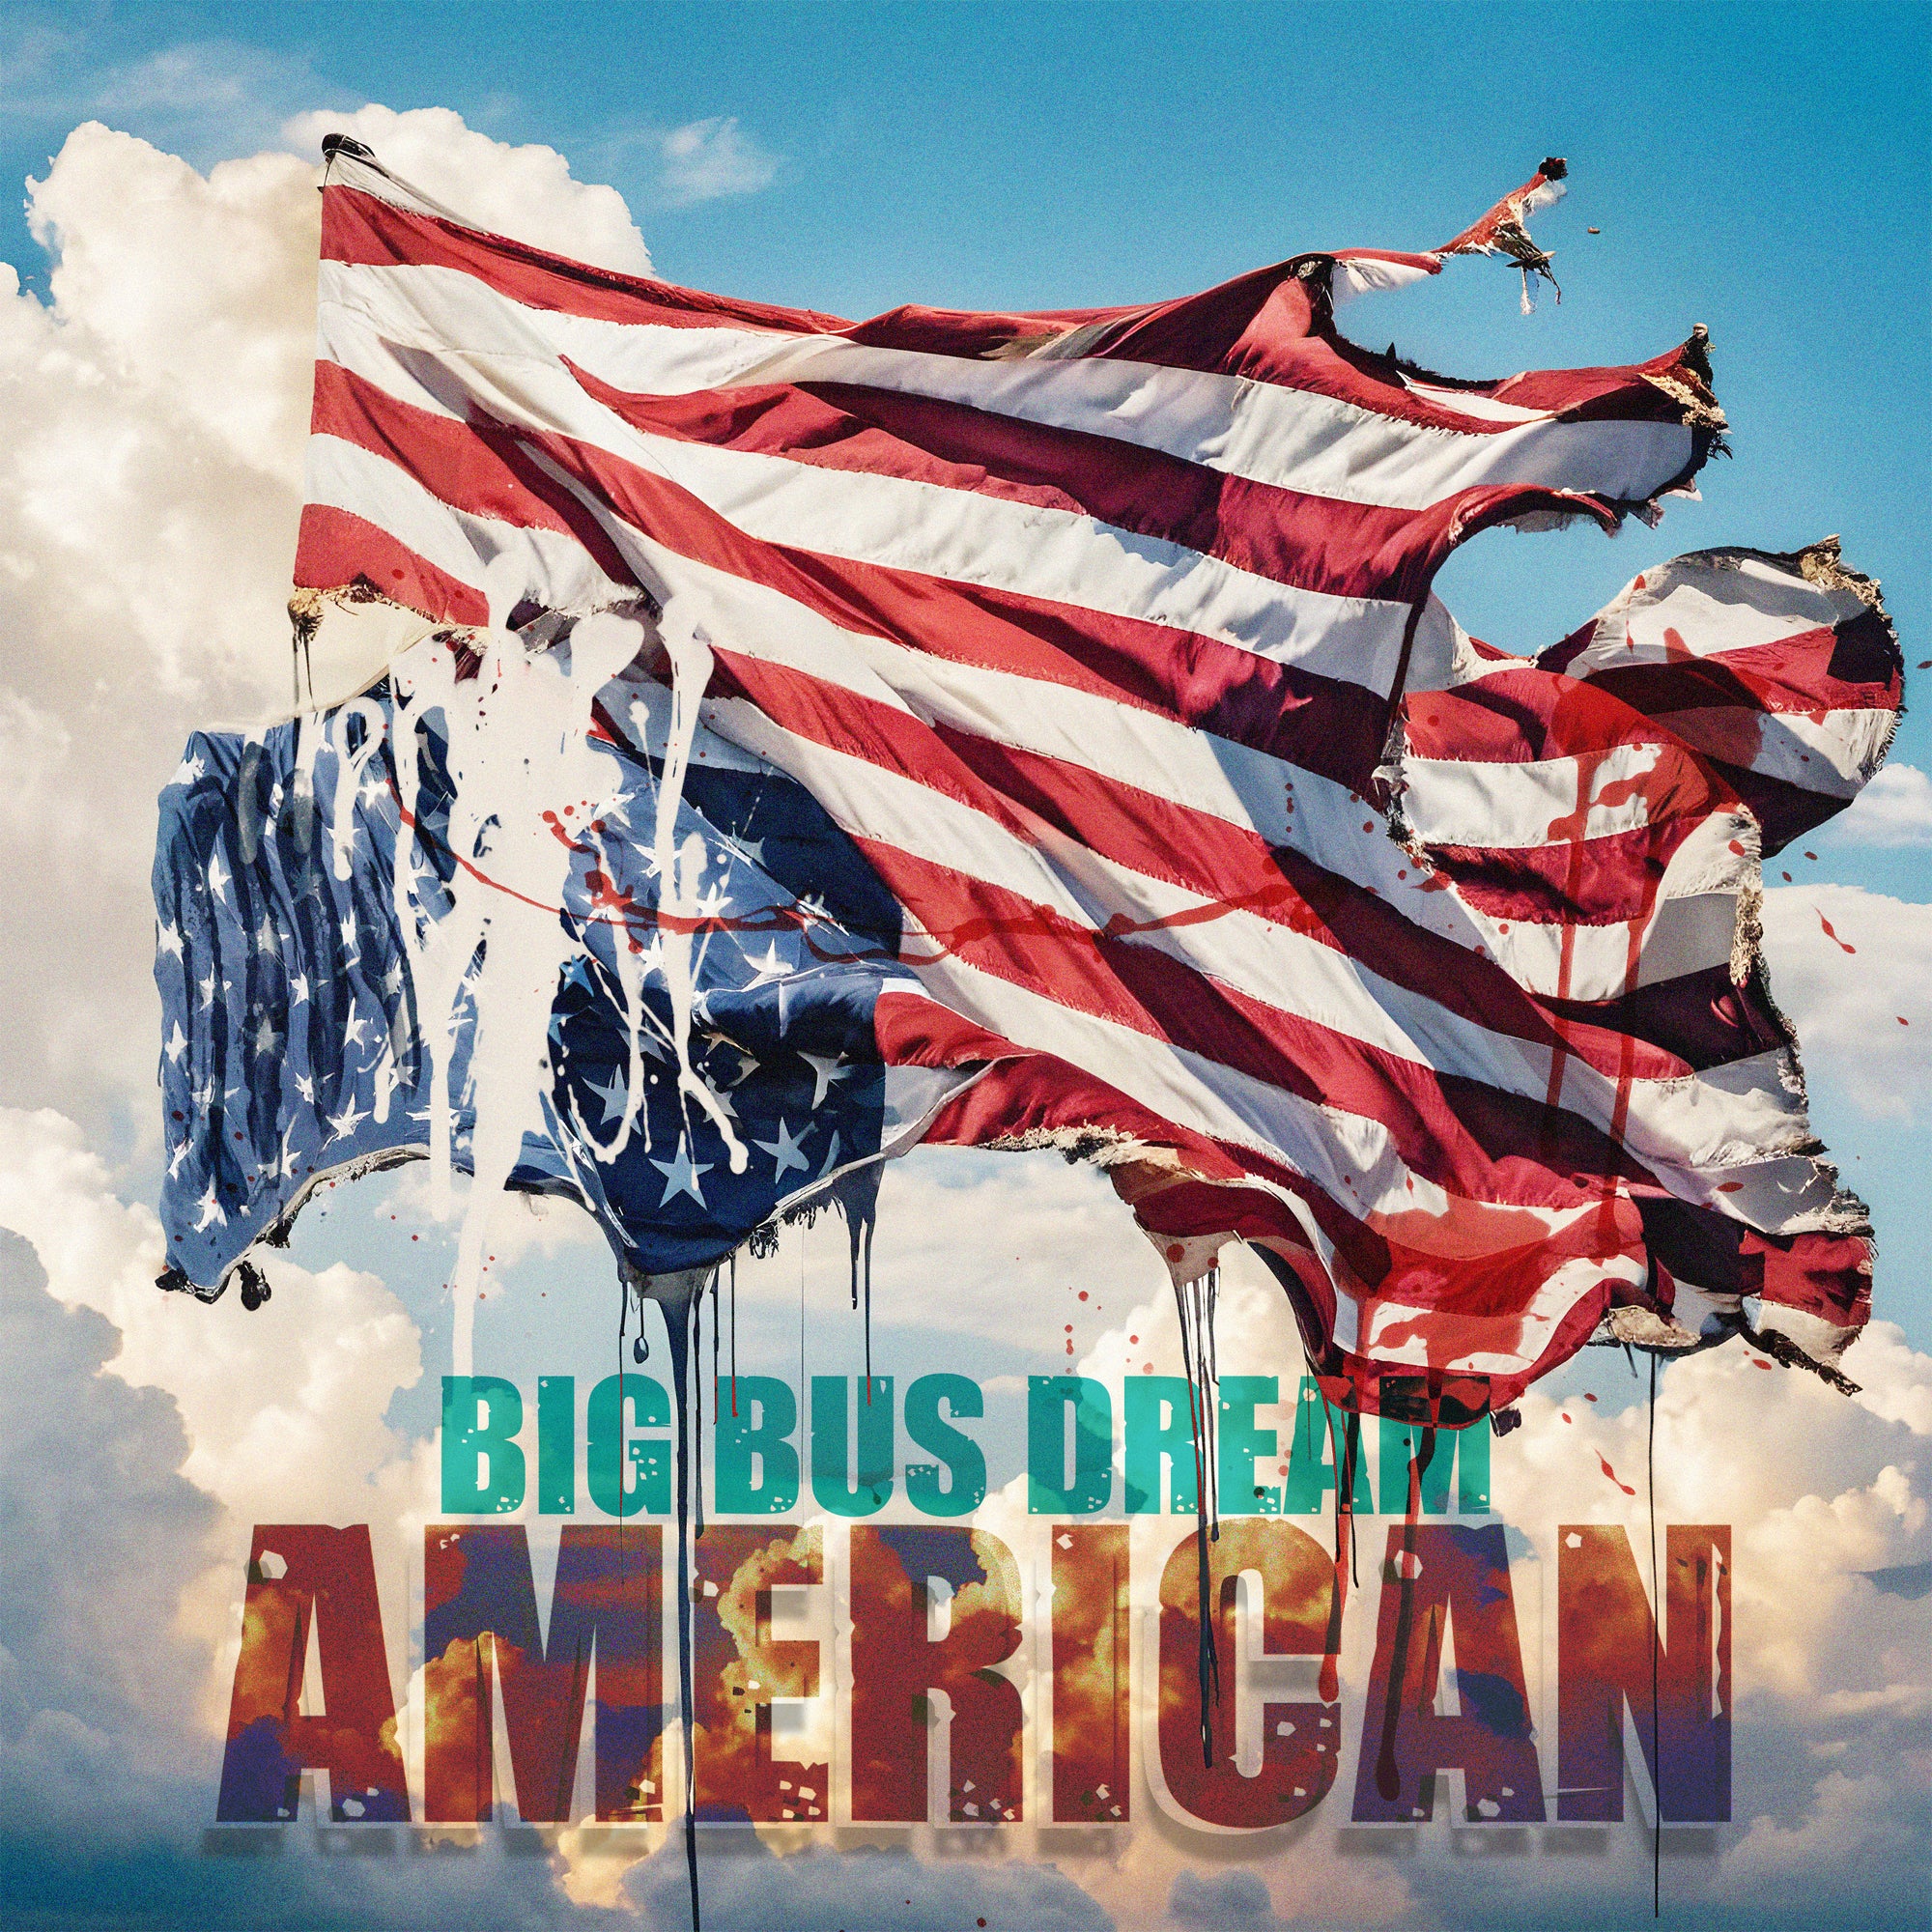 Big Bus Dream Releases New Single ‘American’ Ahead of Album of the Same Name